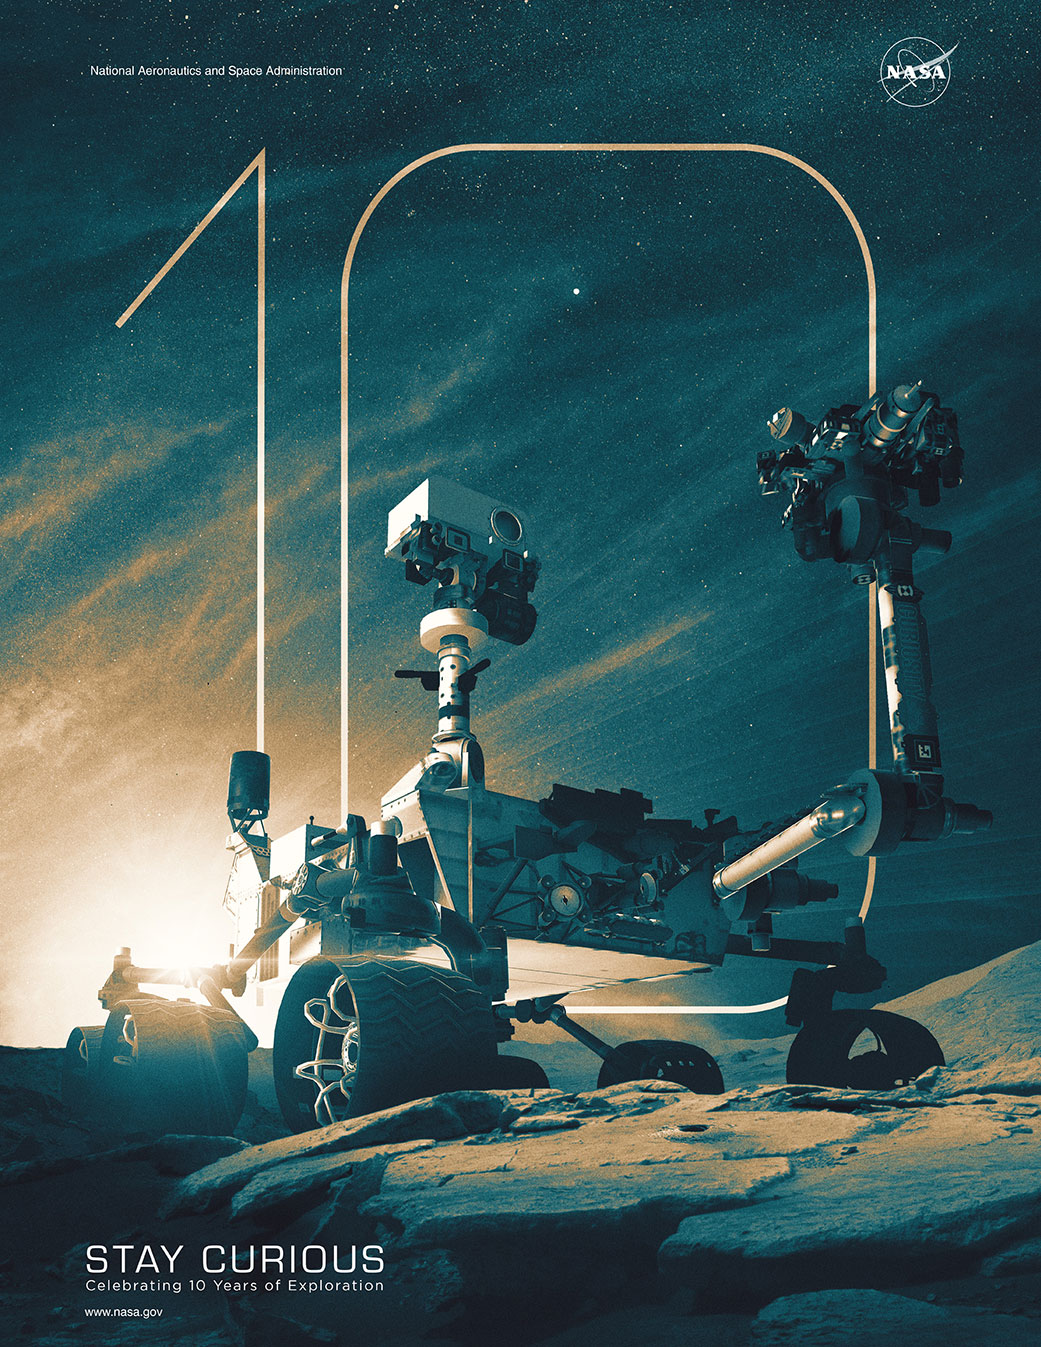 Curiosity Mars rover’s 10th anniversary poster